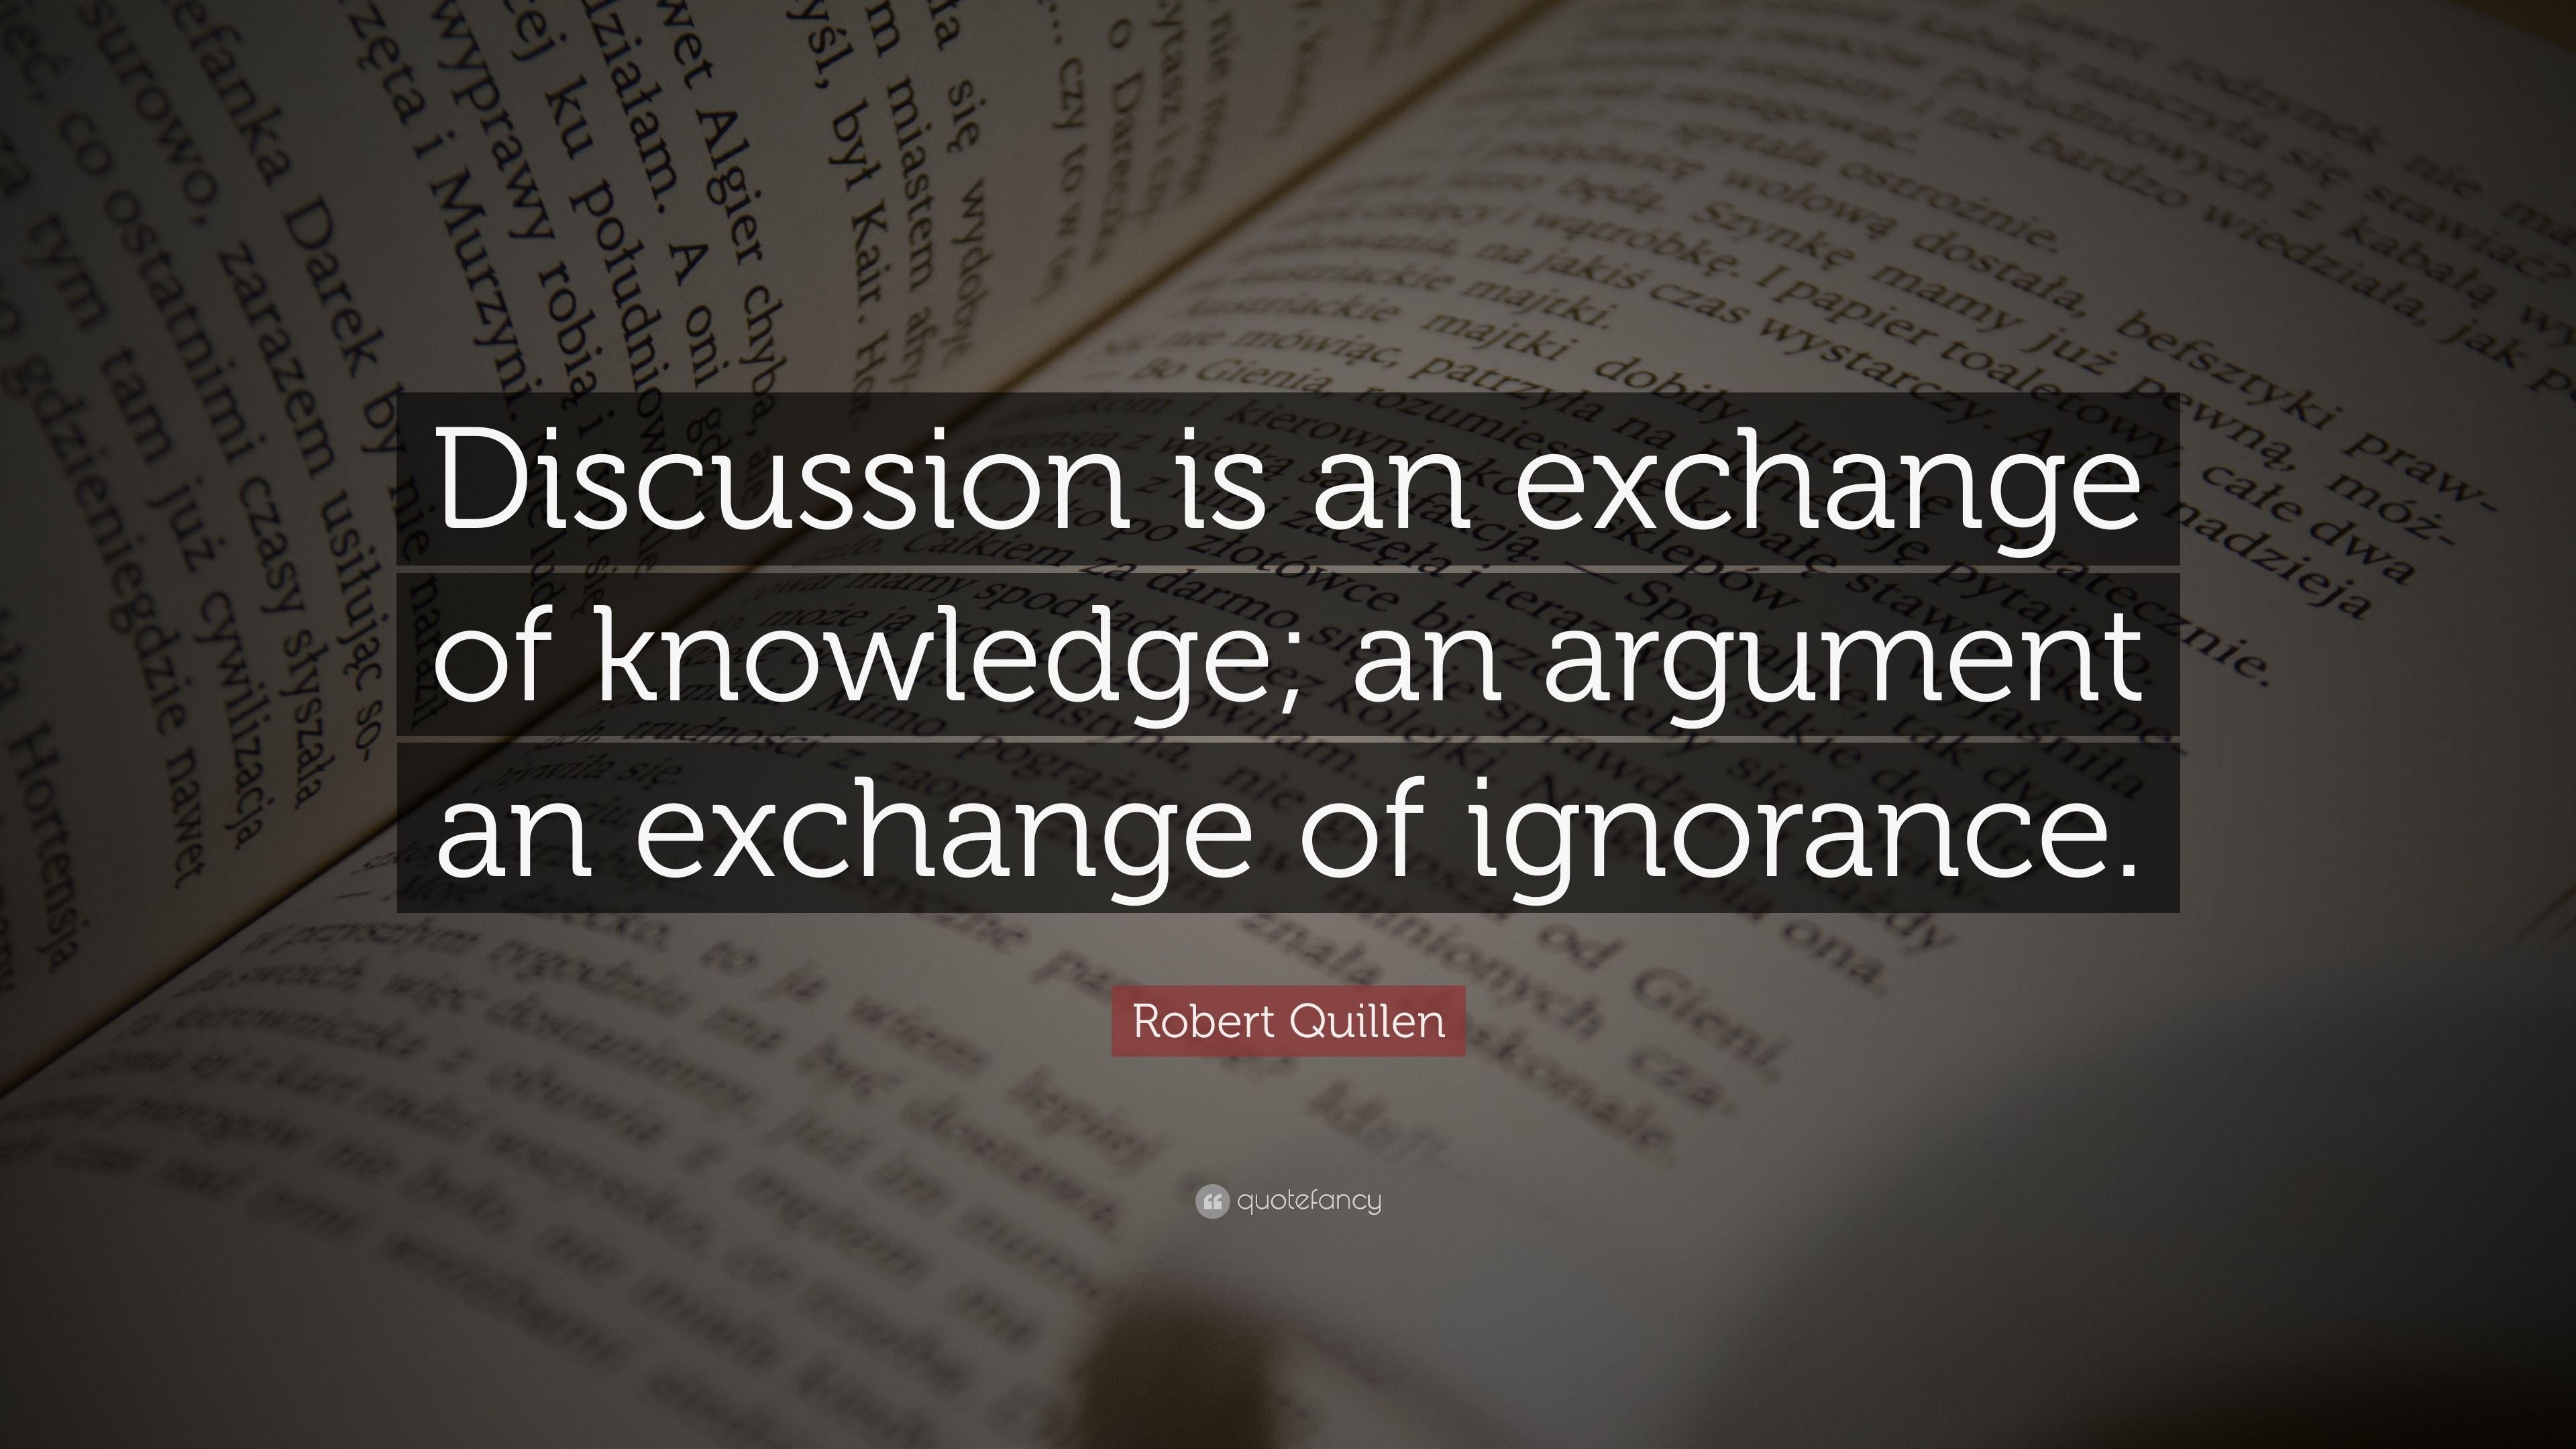 Robert Quillen Quote: “Discussion is an exchange of knowledge; an